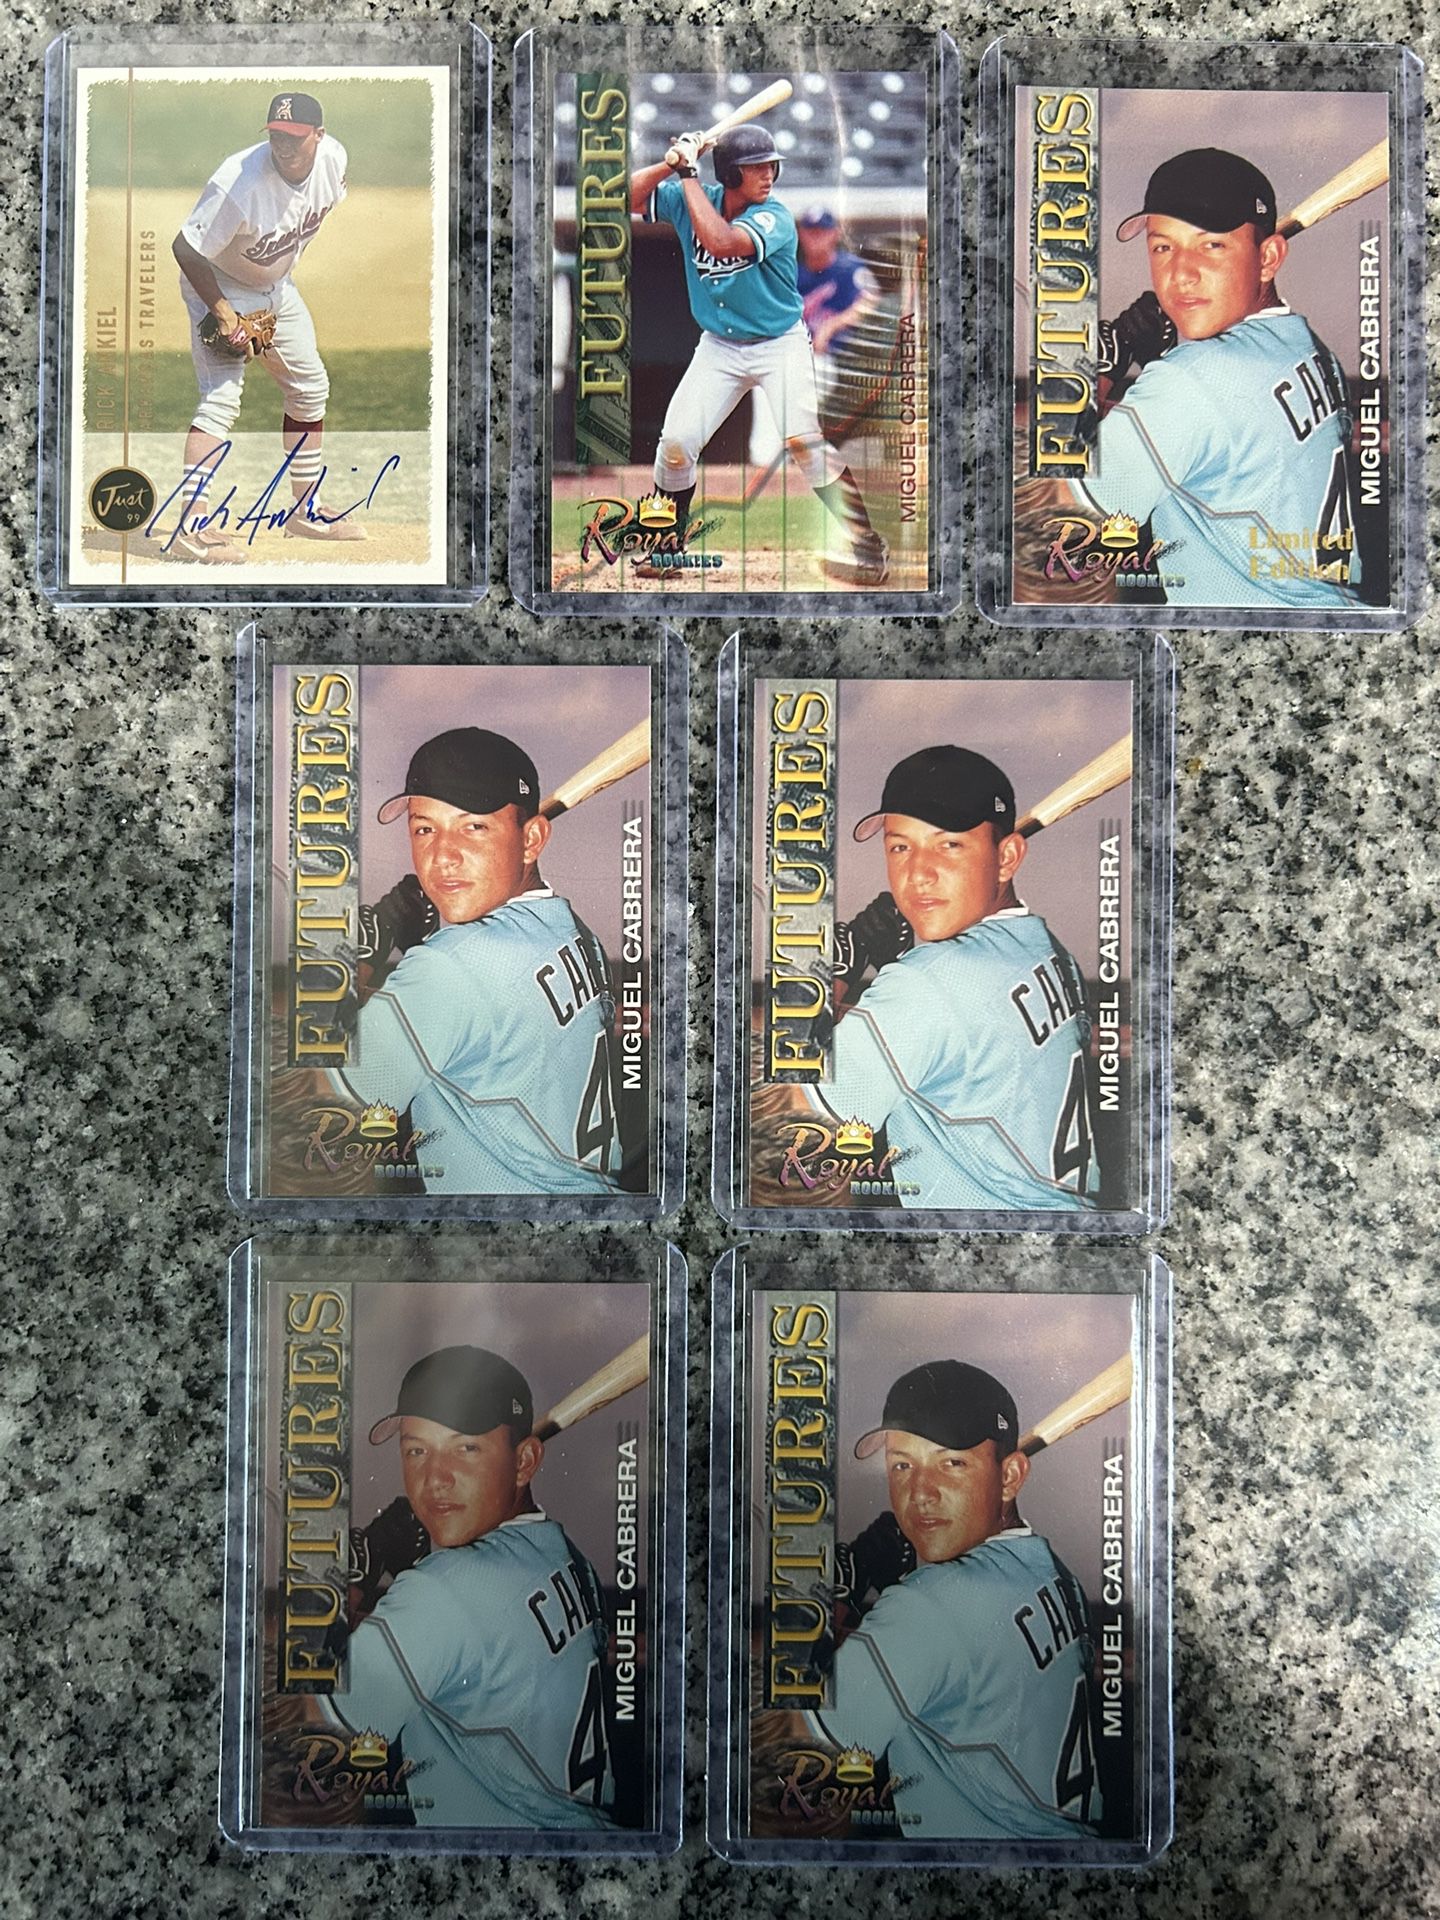 Baseball Cards - 829 Minor League Cards (1989 To 2002)